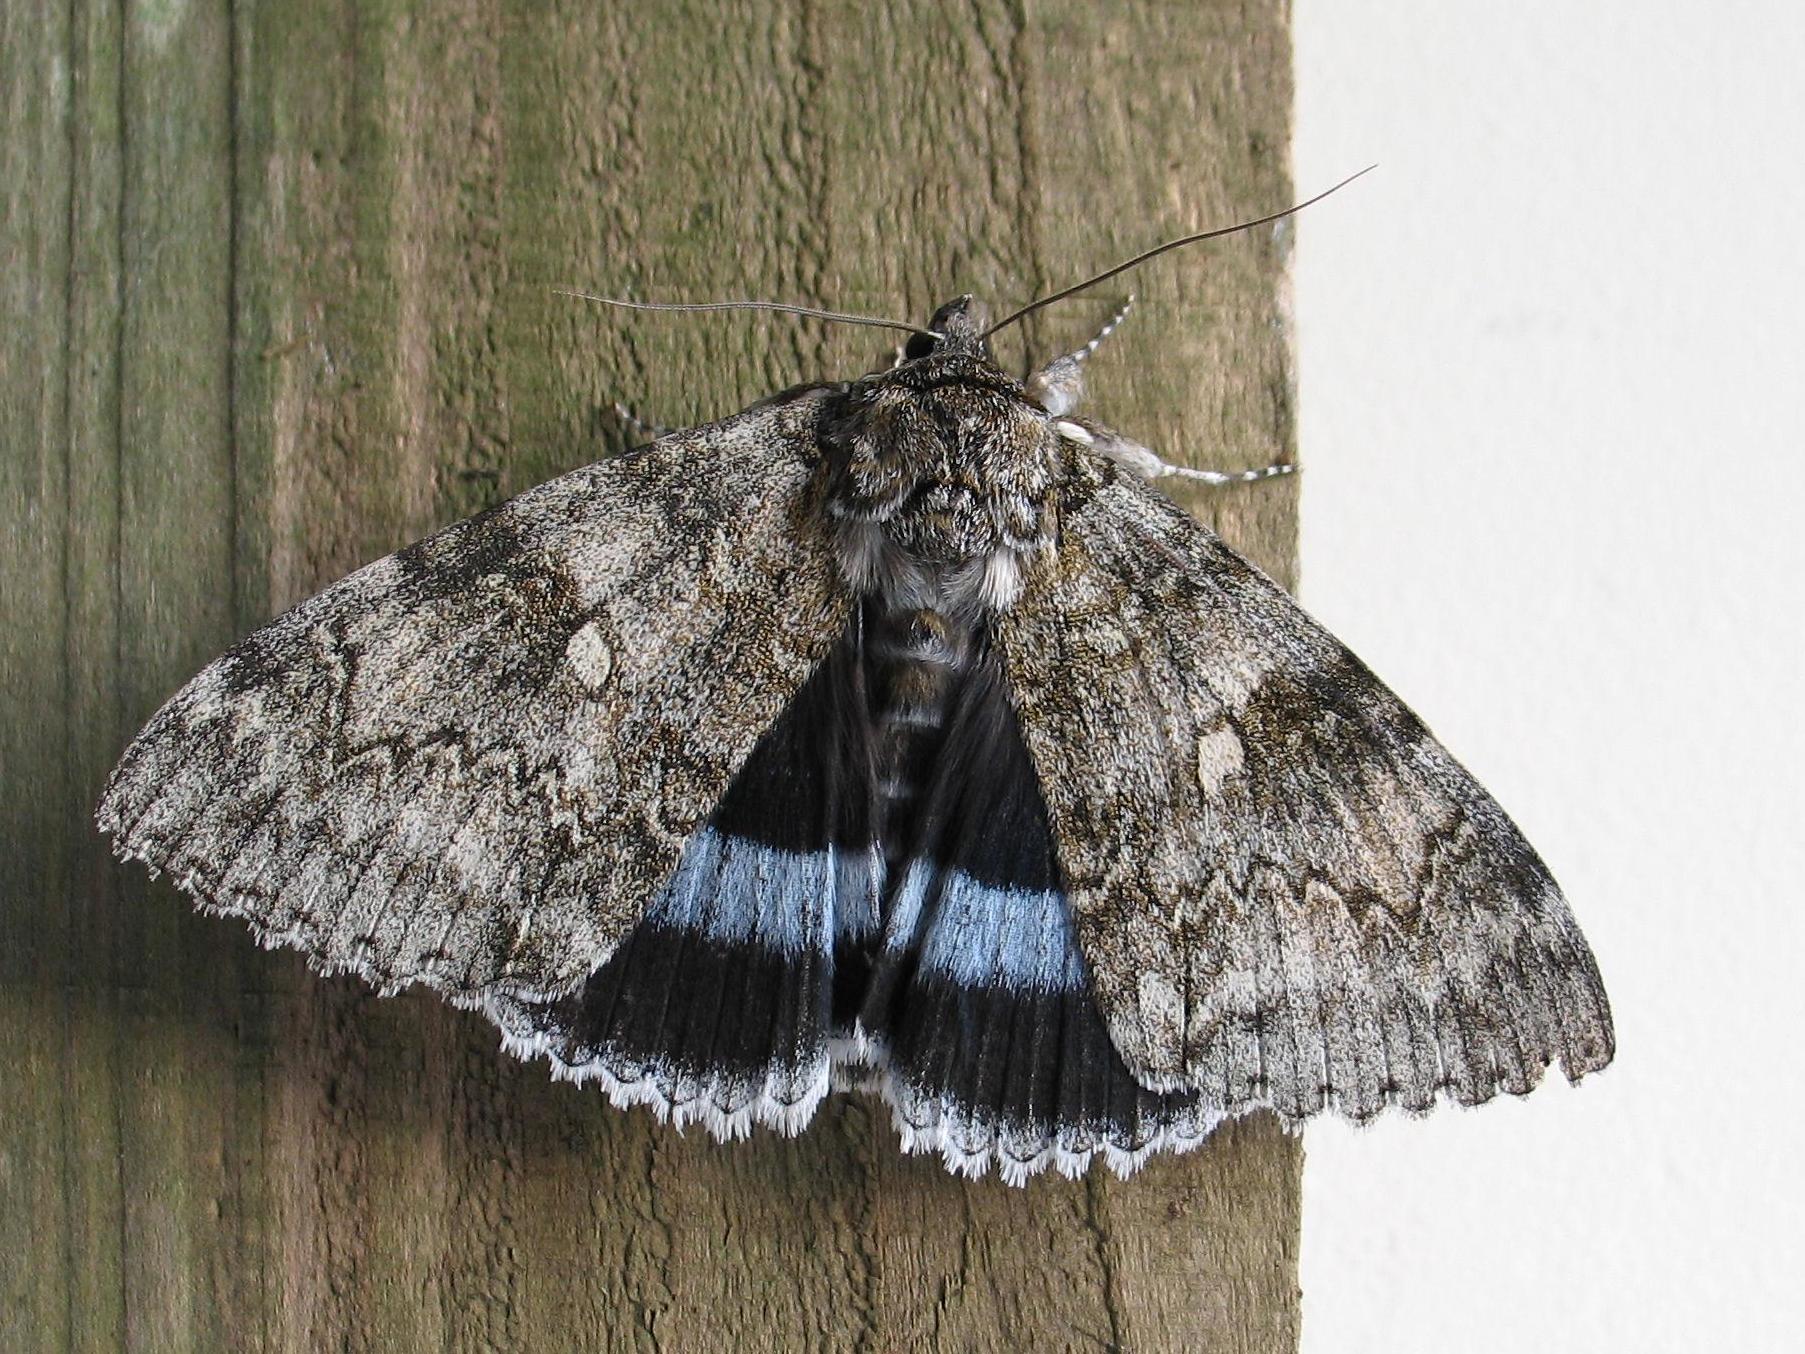 The Clifden nonpareil was believed to have become extinct in the 1960s and has long been regarded as a holy grail among moth enthusiasts